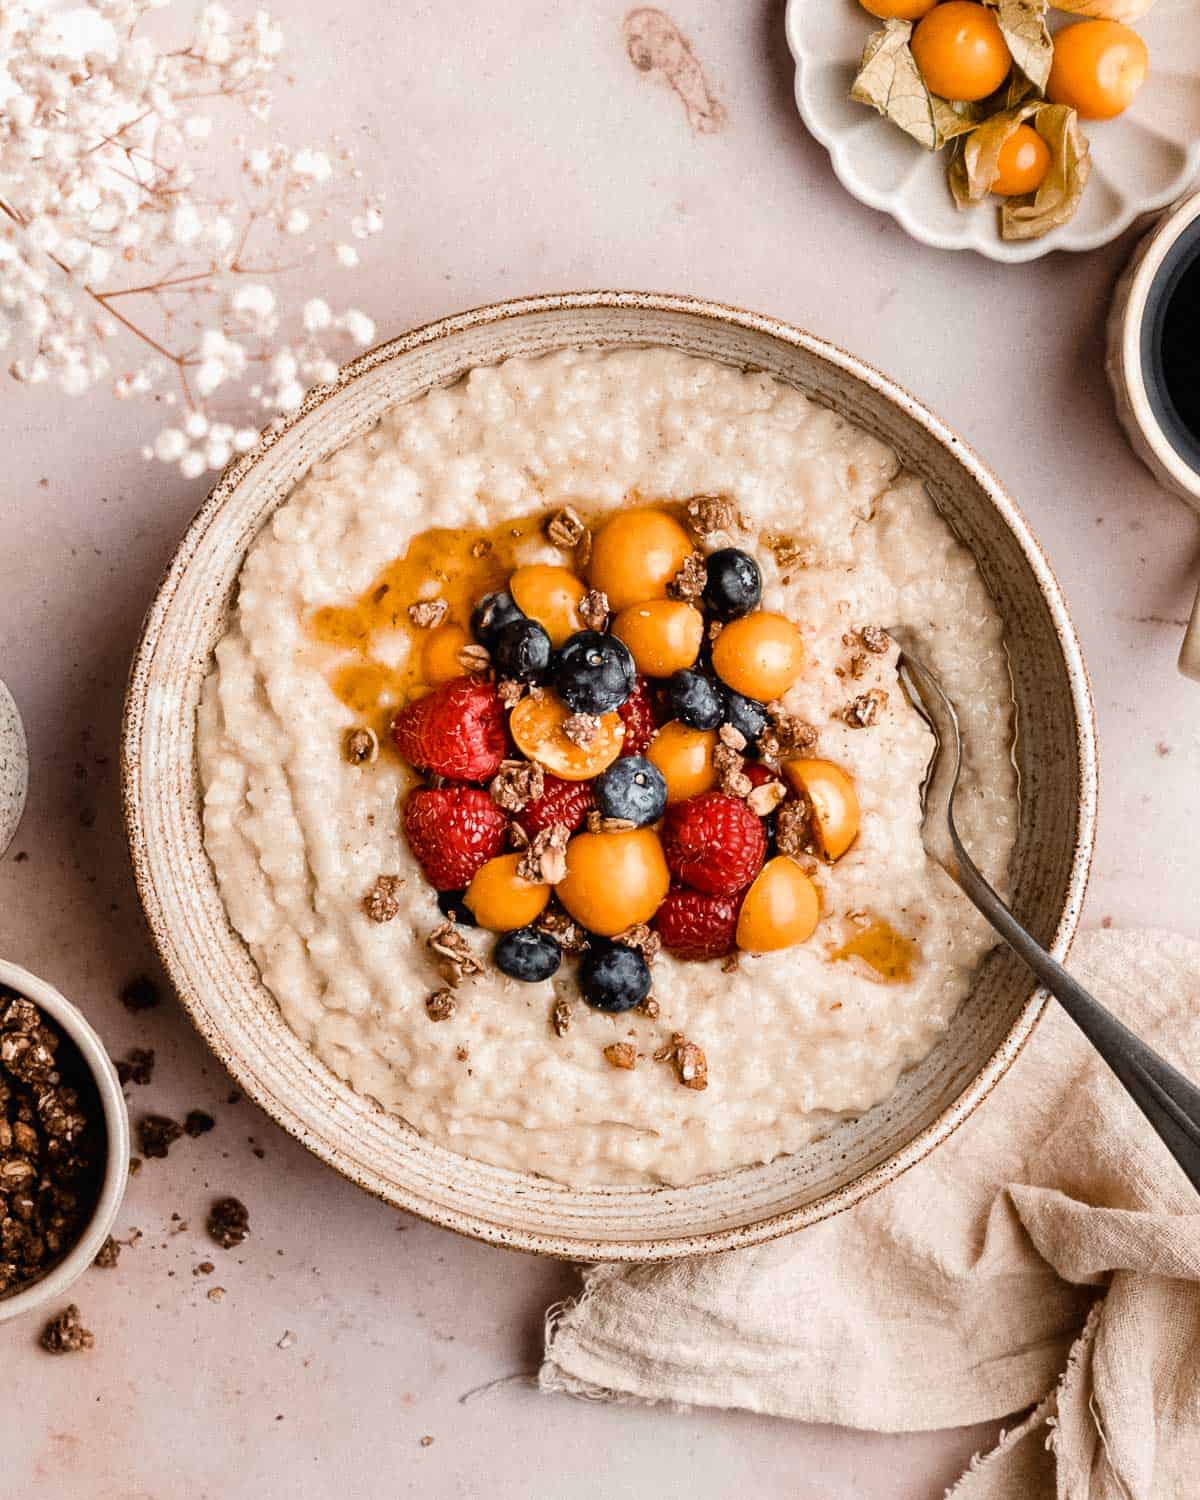 Barley Porridge Breakfast Bowl with Chia Seeds: A Nutritious Start to Your Day